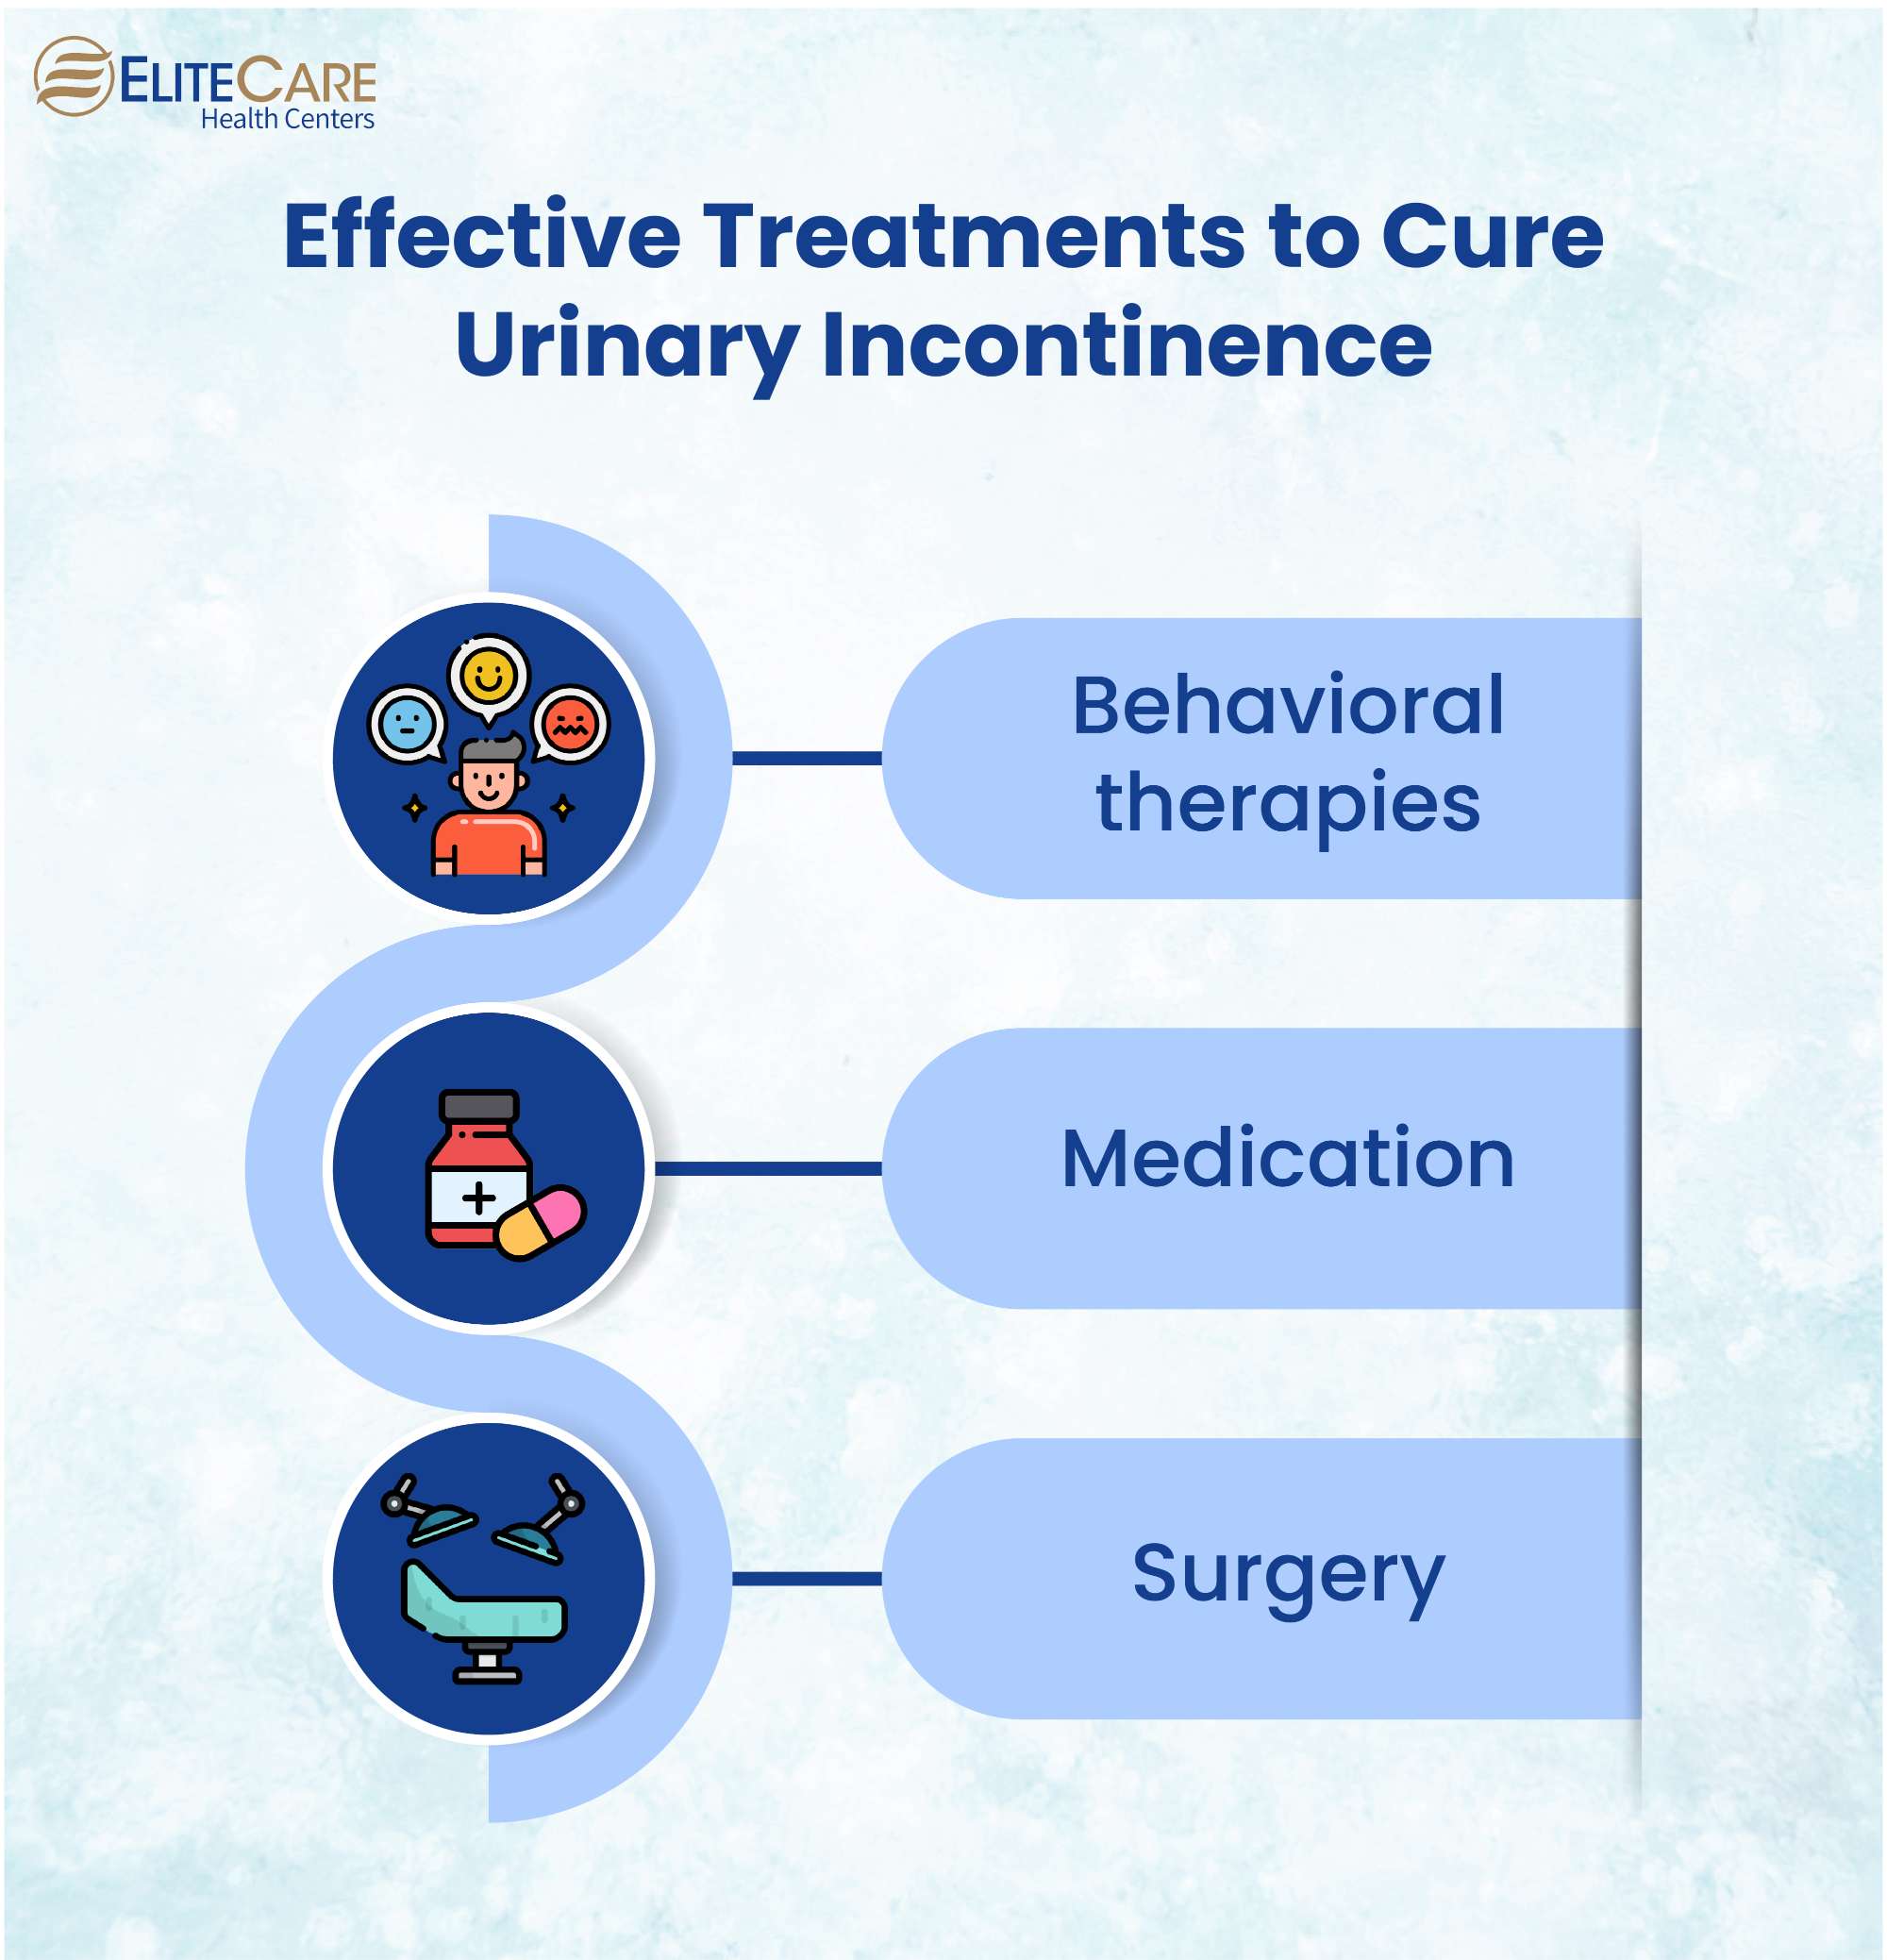 Effective Treatment to Cure Urinary Incontinence